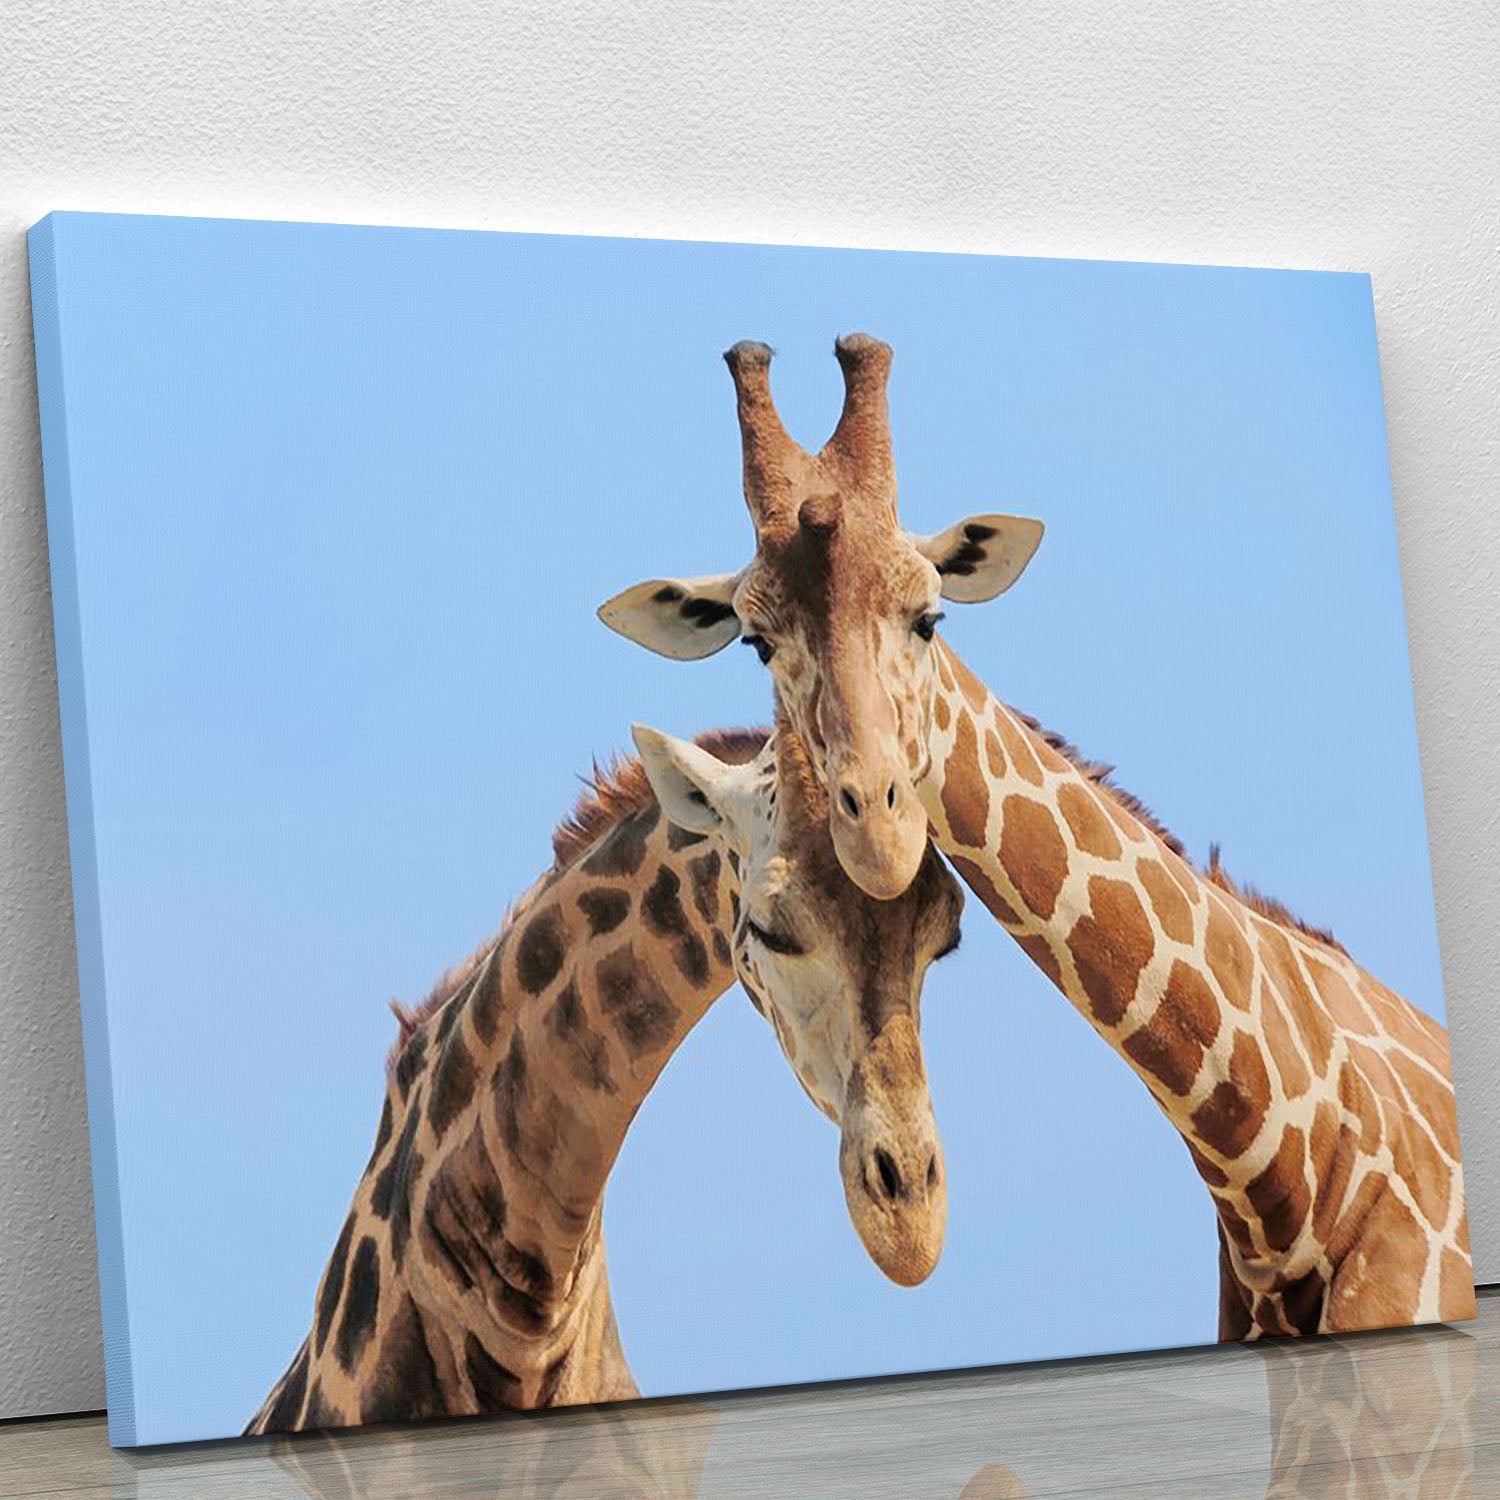 Giraffe couple in love with blue sky on background Canvas Print or Poster - Canvas Art Rocks - 1